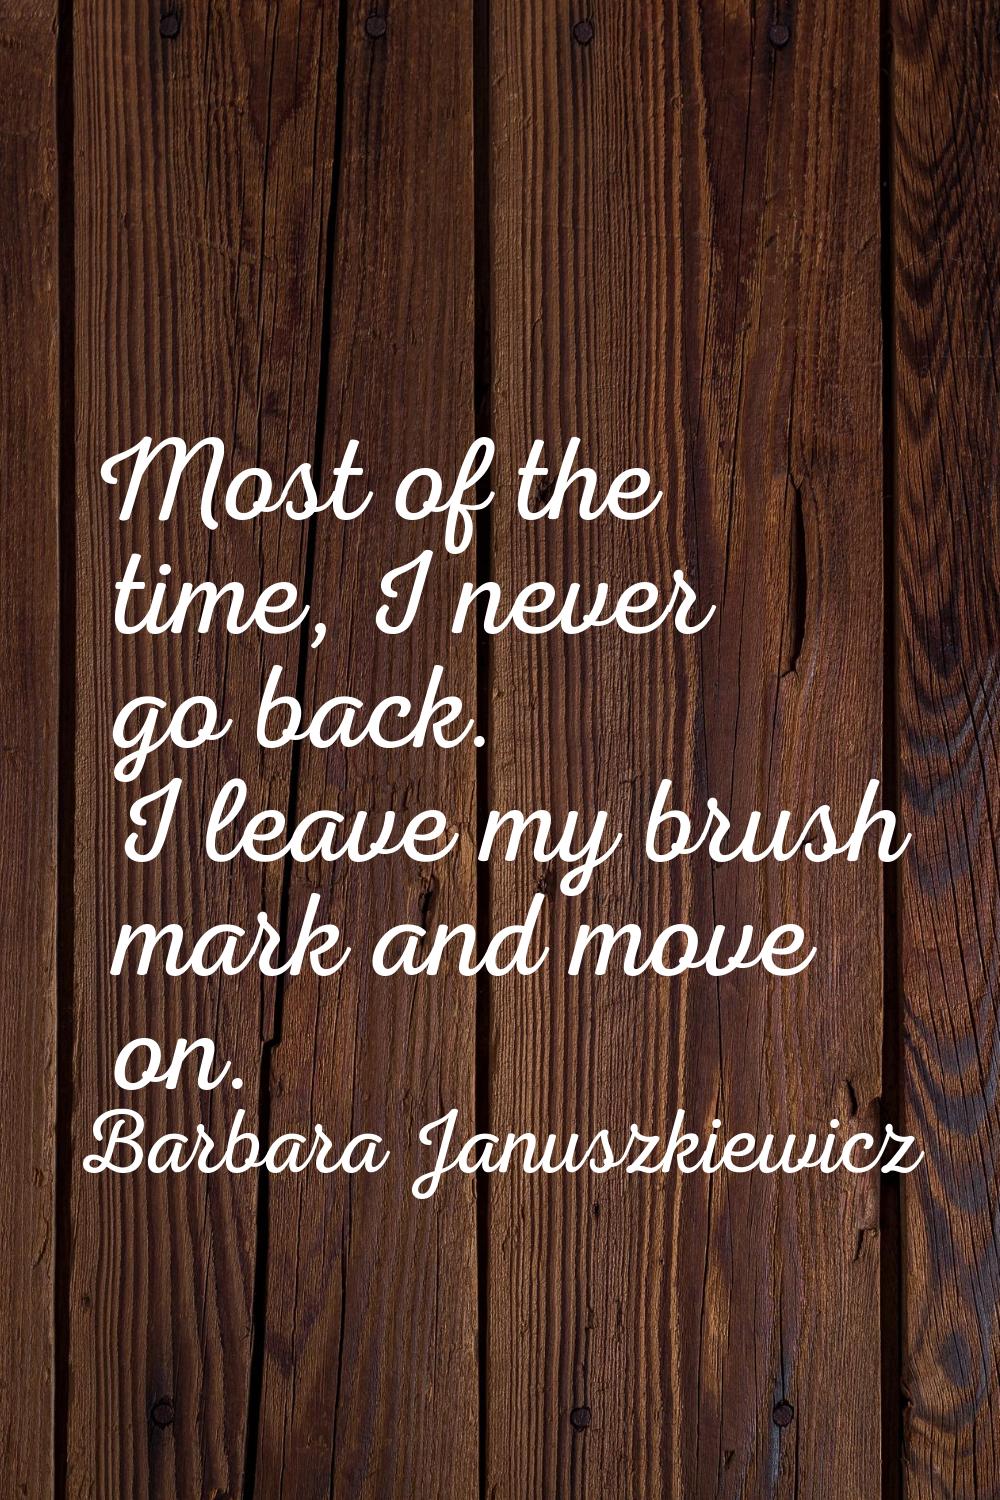 Most of the time, I never go back. I leave my brush mark and move on.